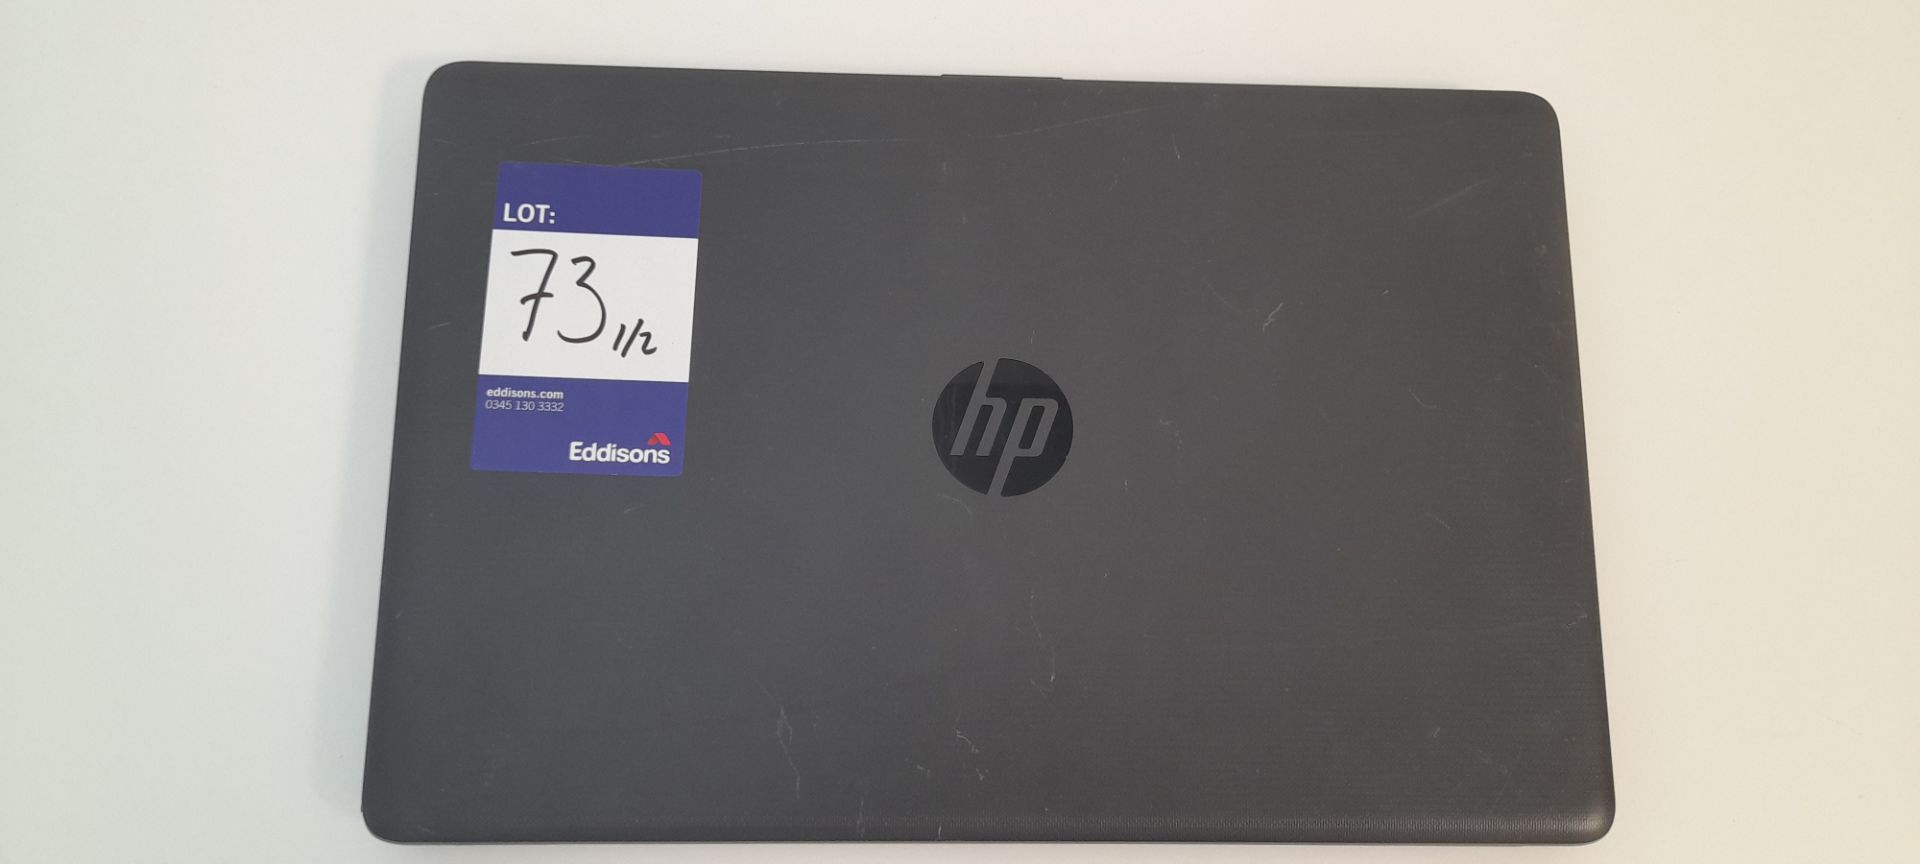 2x HP G250 G7 laptop with intel Core i5, 8th Gen. Collection from Canary Wharf, London, E14